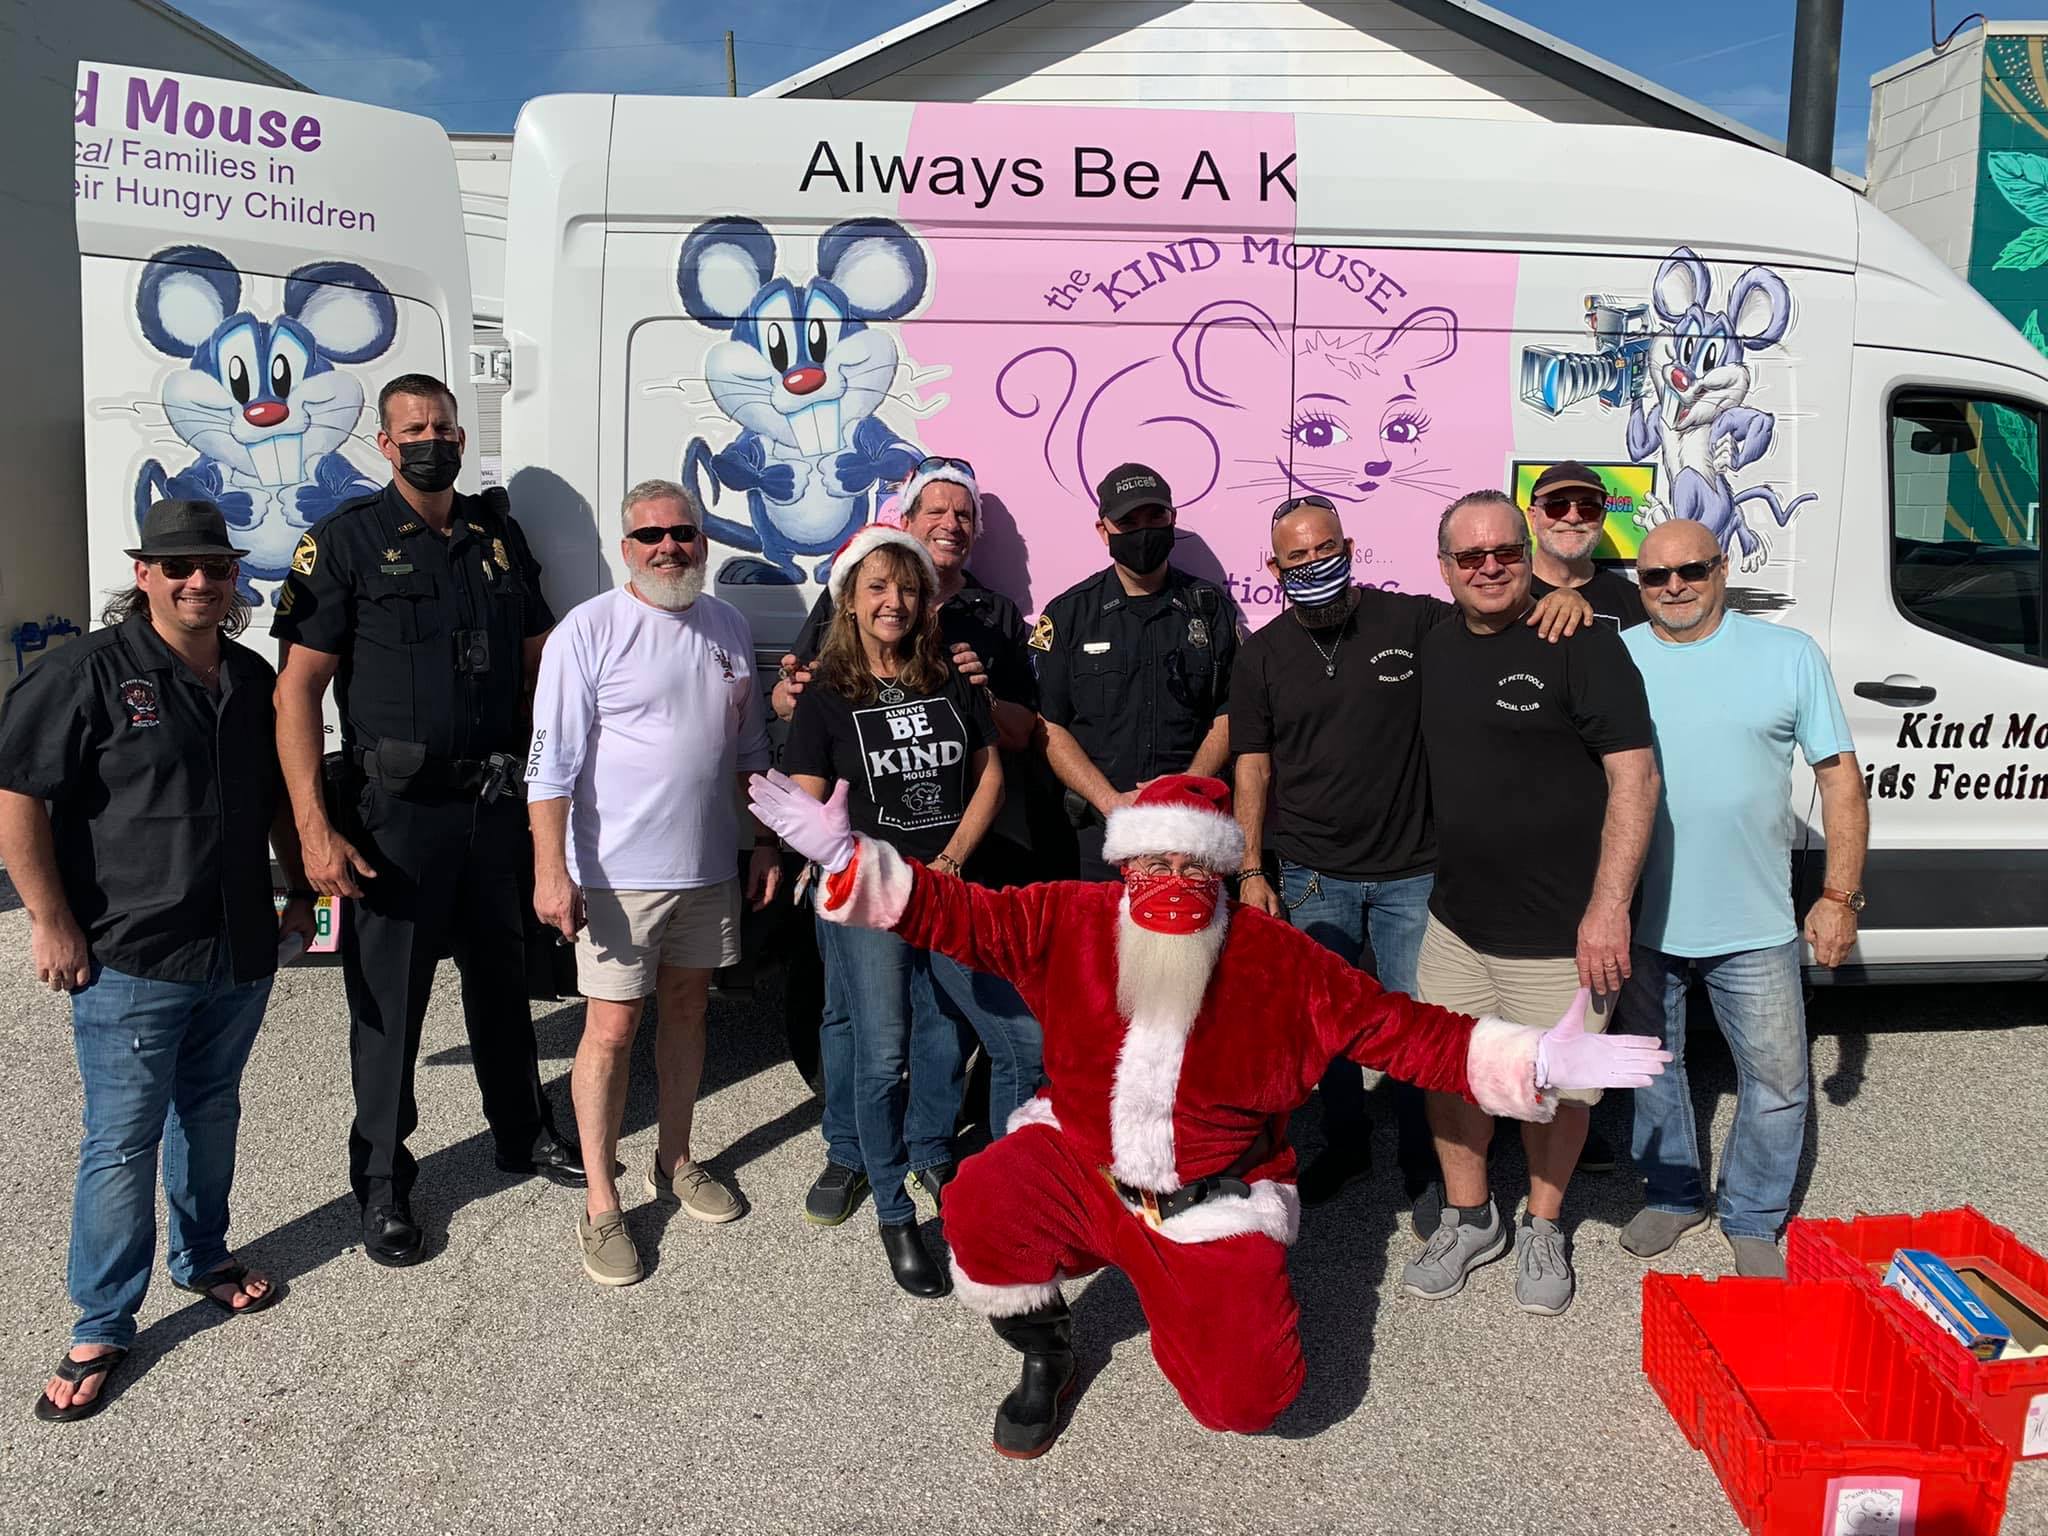 St. Pete Fools Charities Celebrates the Season of Giving with a Toy Drive